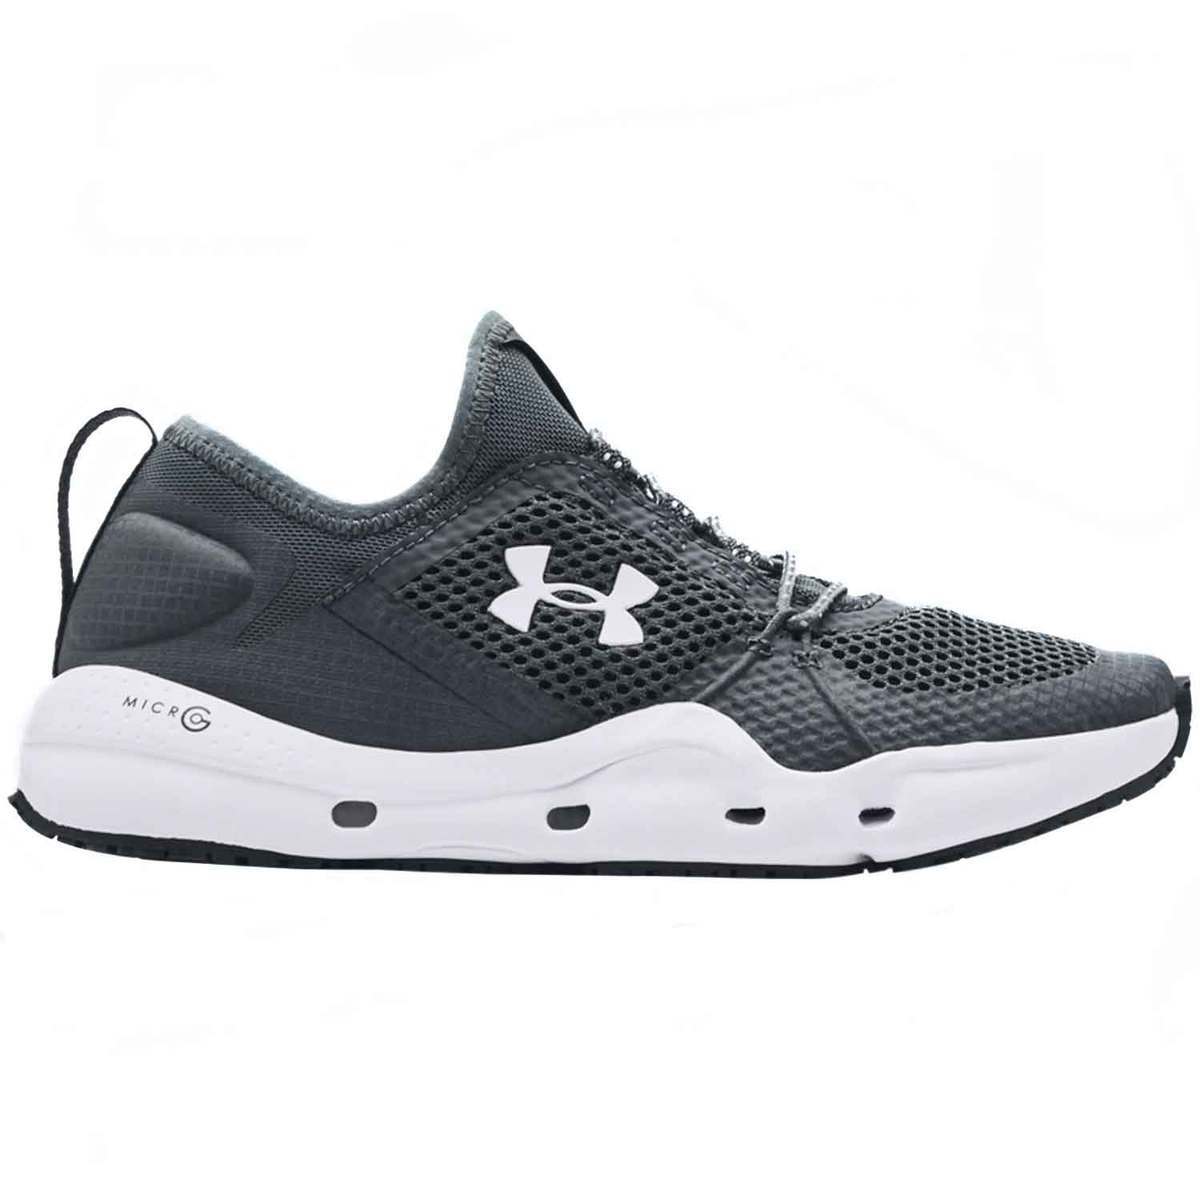 Under Armour Women's Micro G Kilchis Fishing Shoes | Sportsman's Warehouse